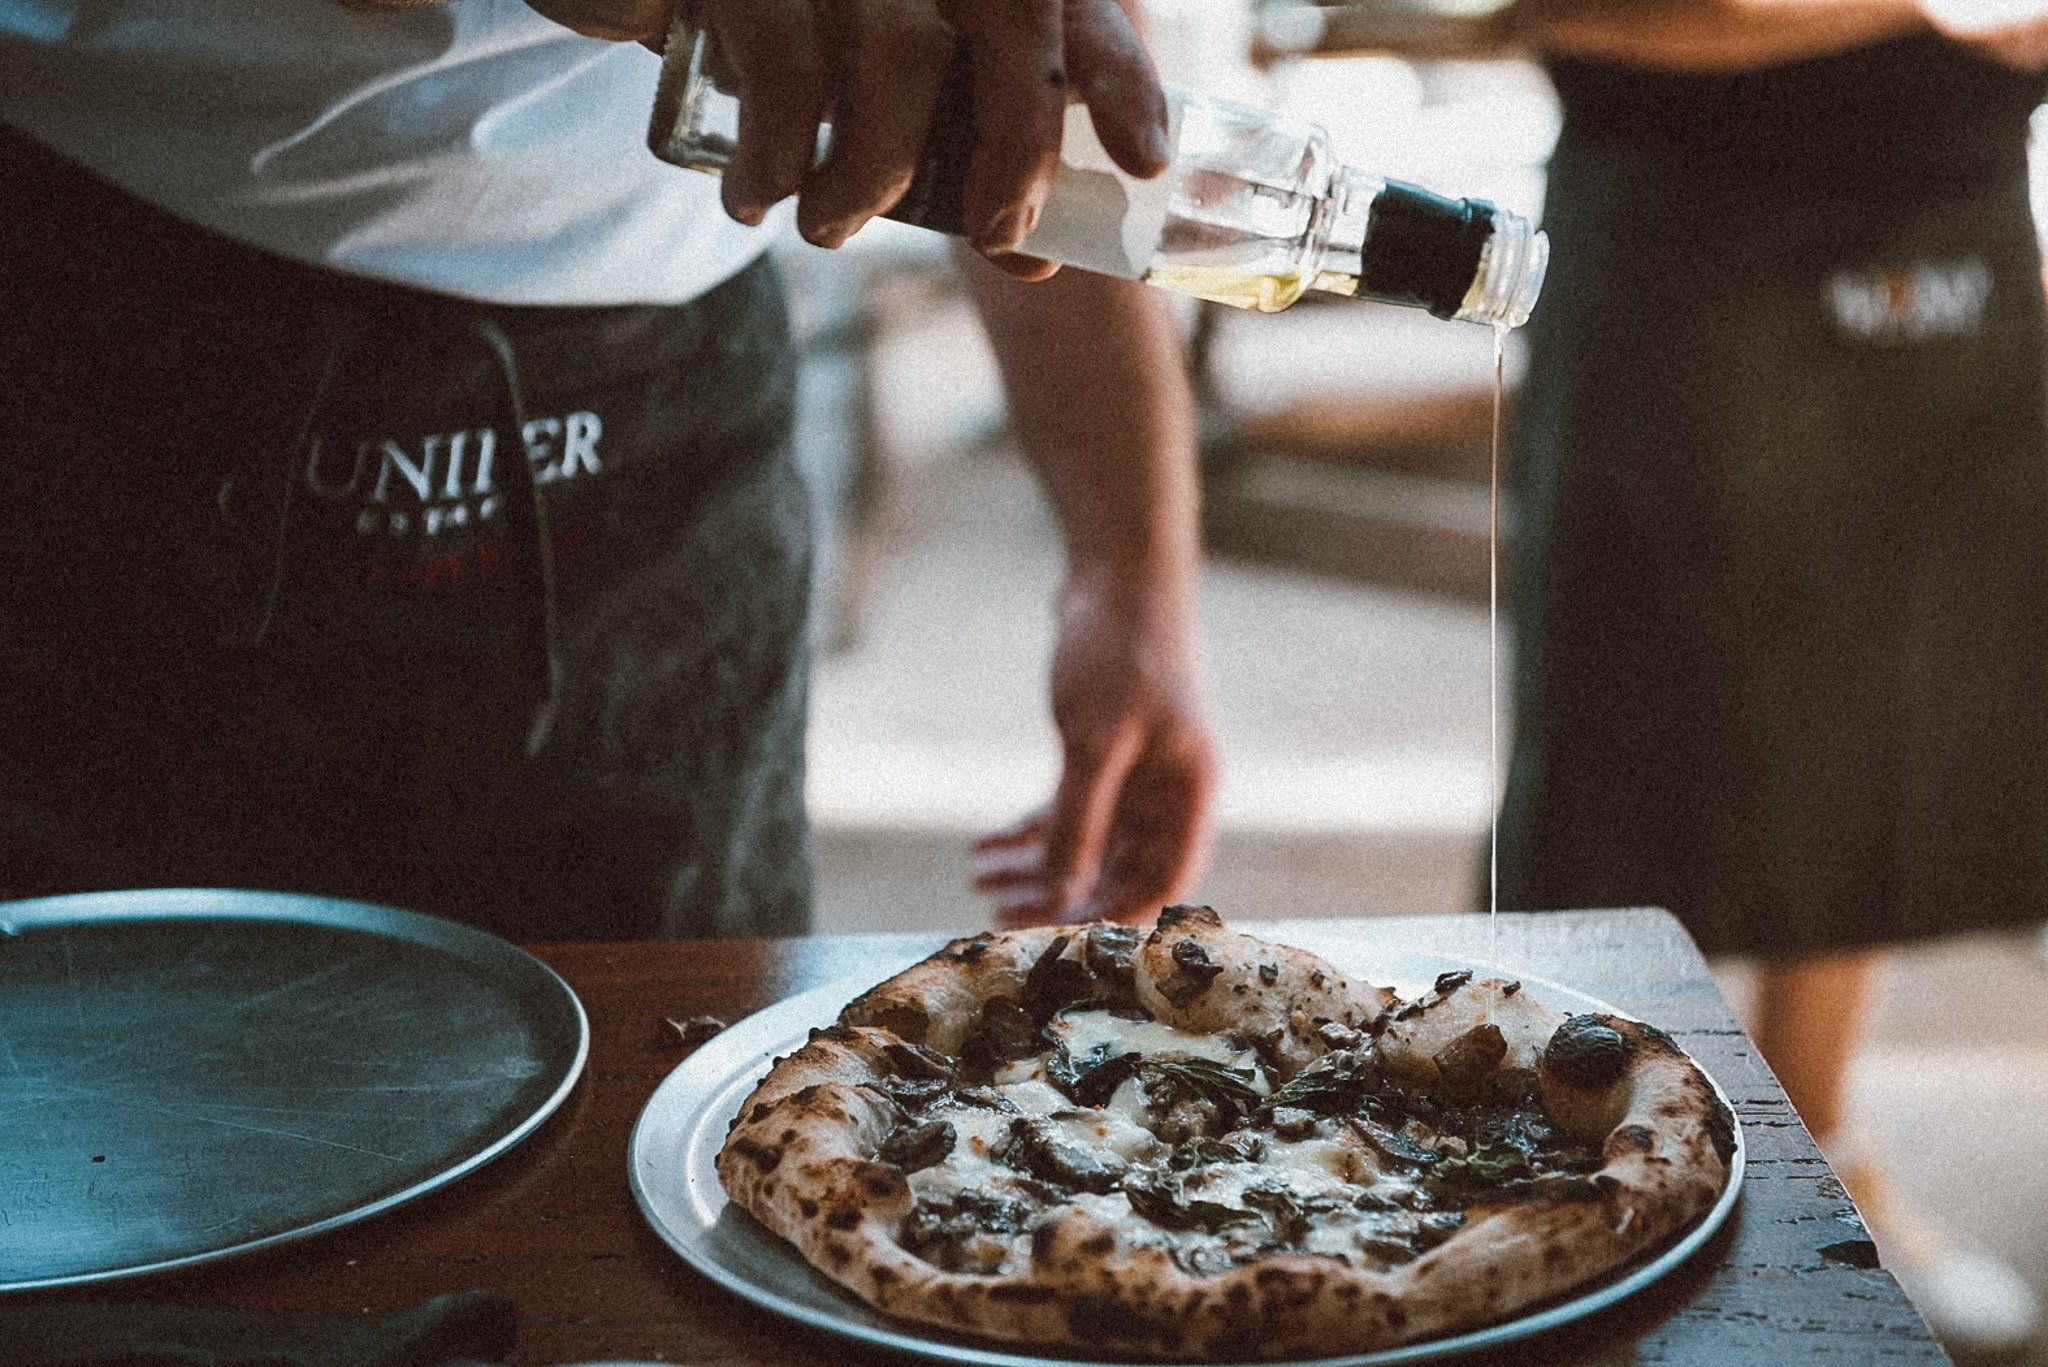 Close up image of a chef pouring olive oil over a pizza